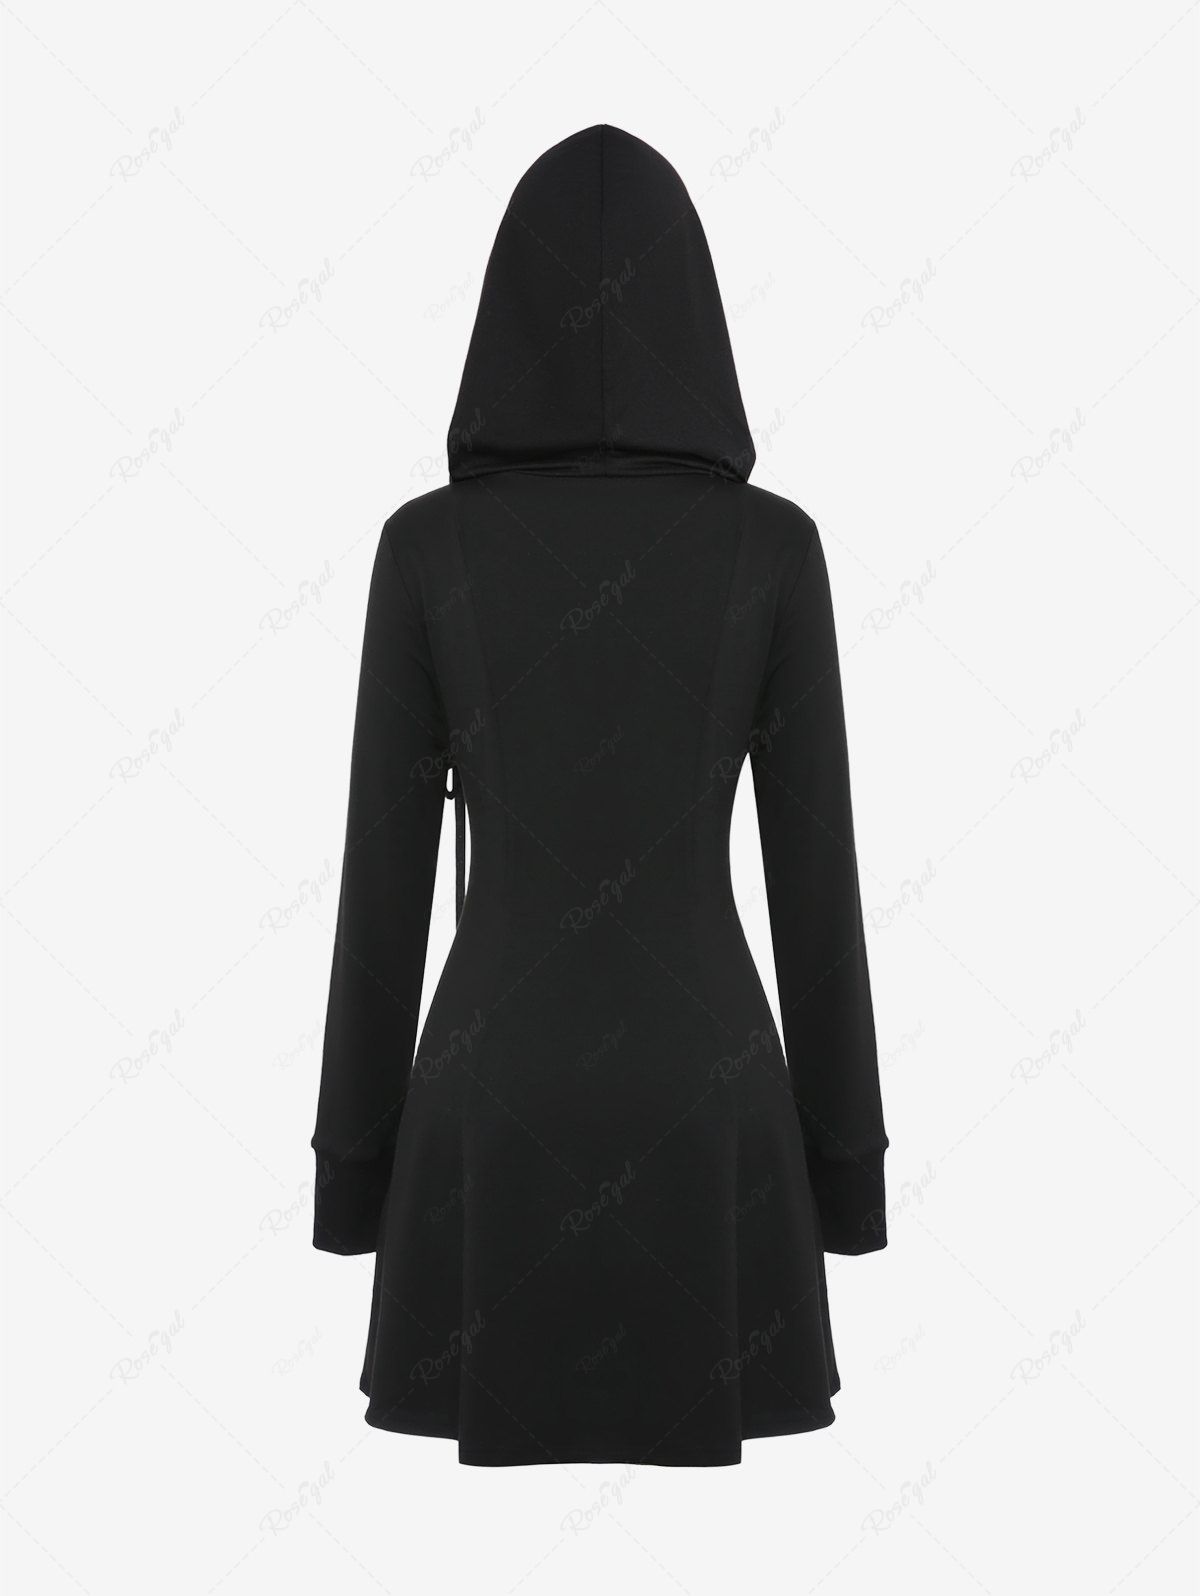 Gothic PU Panel Turn-down Collar Grommet Lace Up Braided Side Zip Hooded Coat